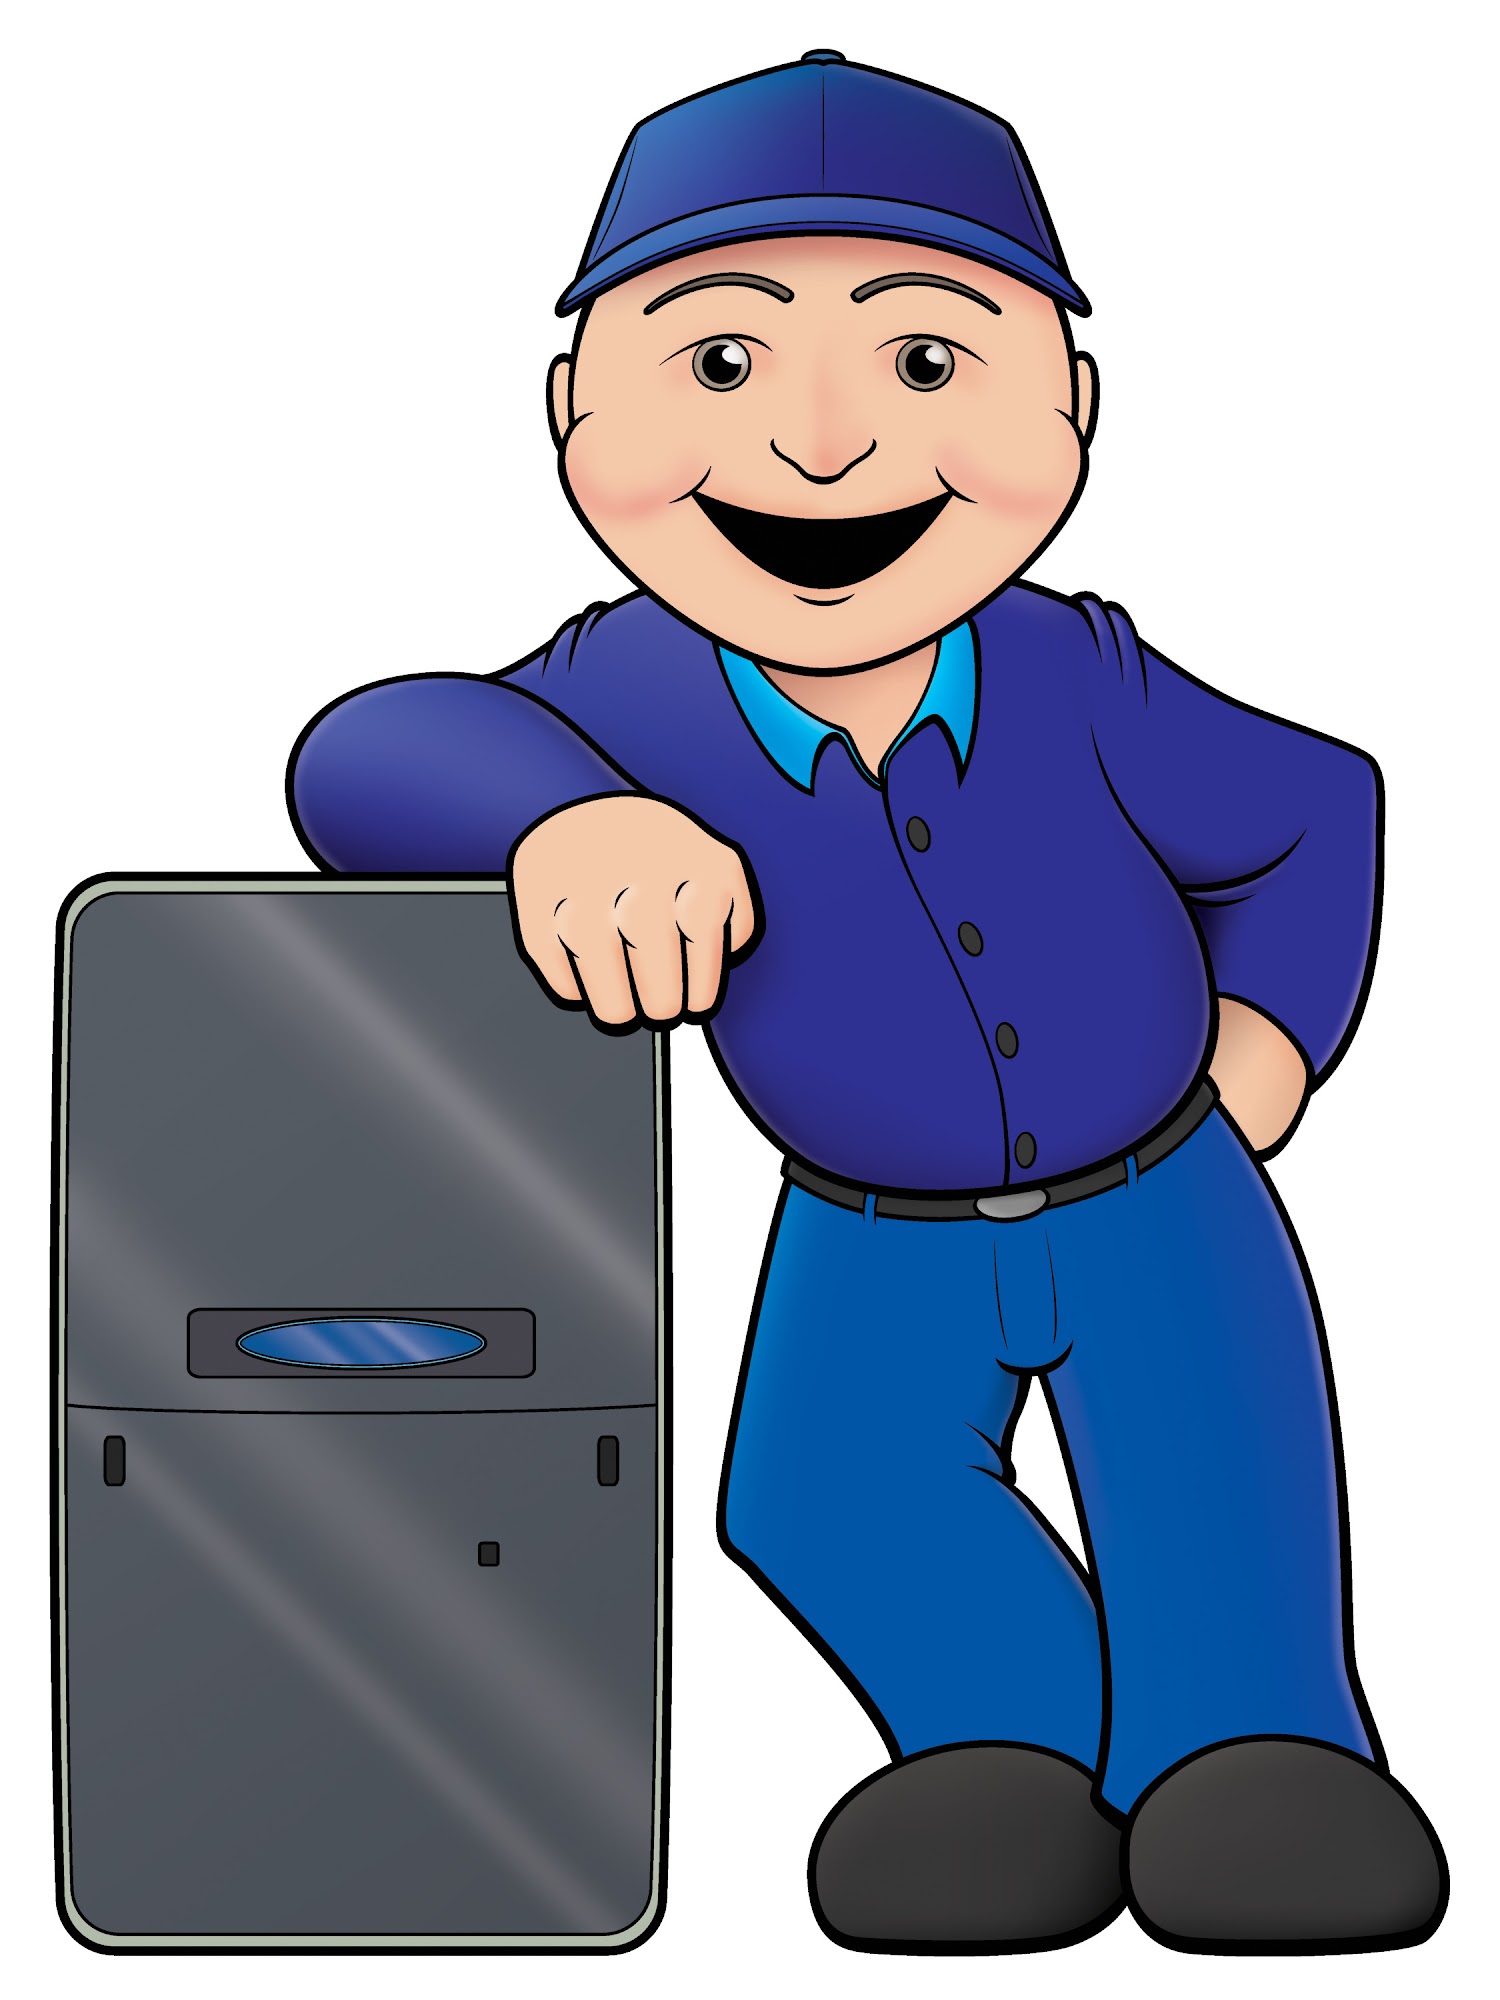 Cliff and Sons Heating and Cooling 758 E Chicago Rd, Quincy Michigan 49082